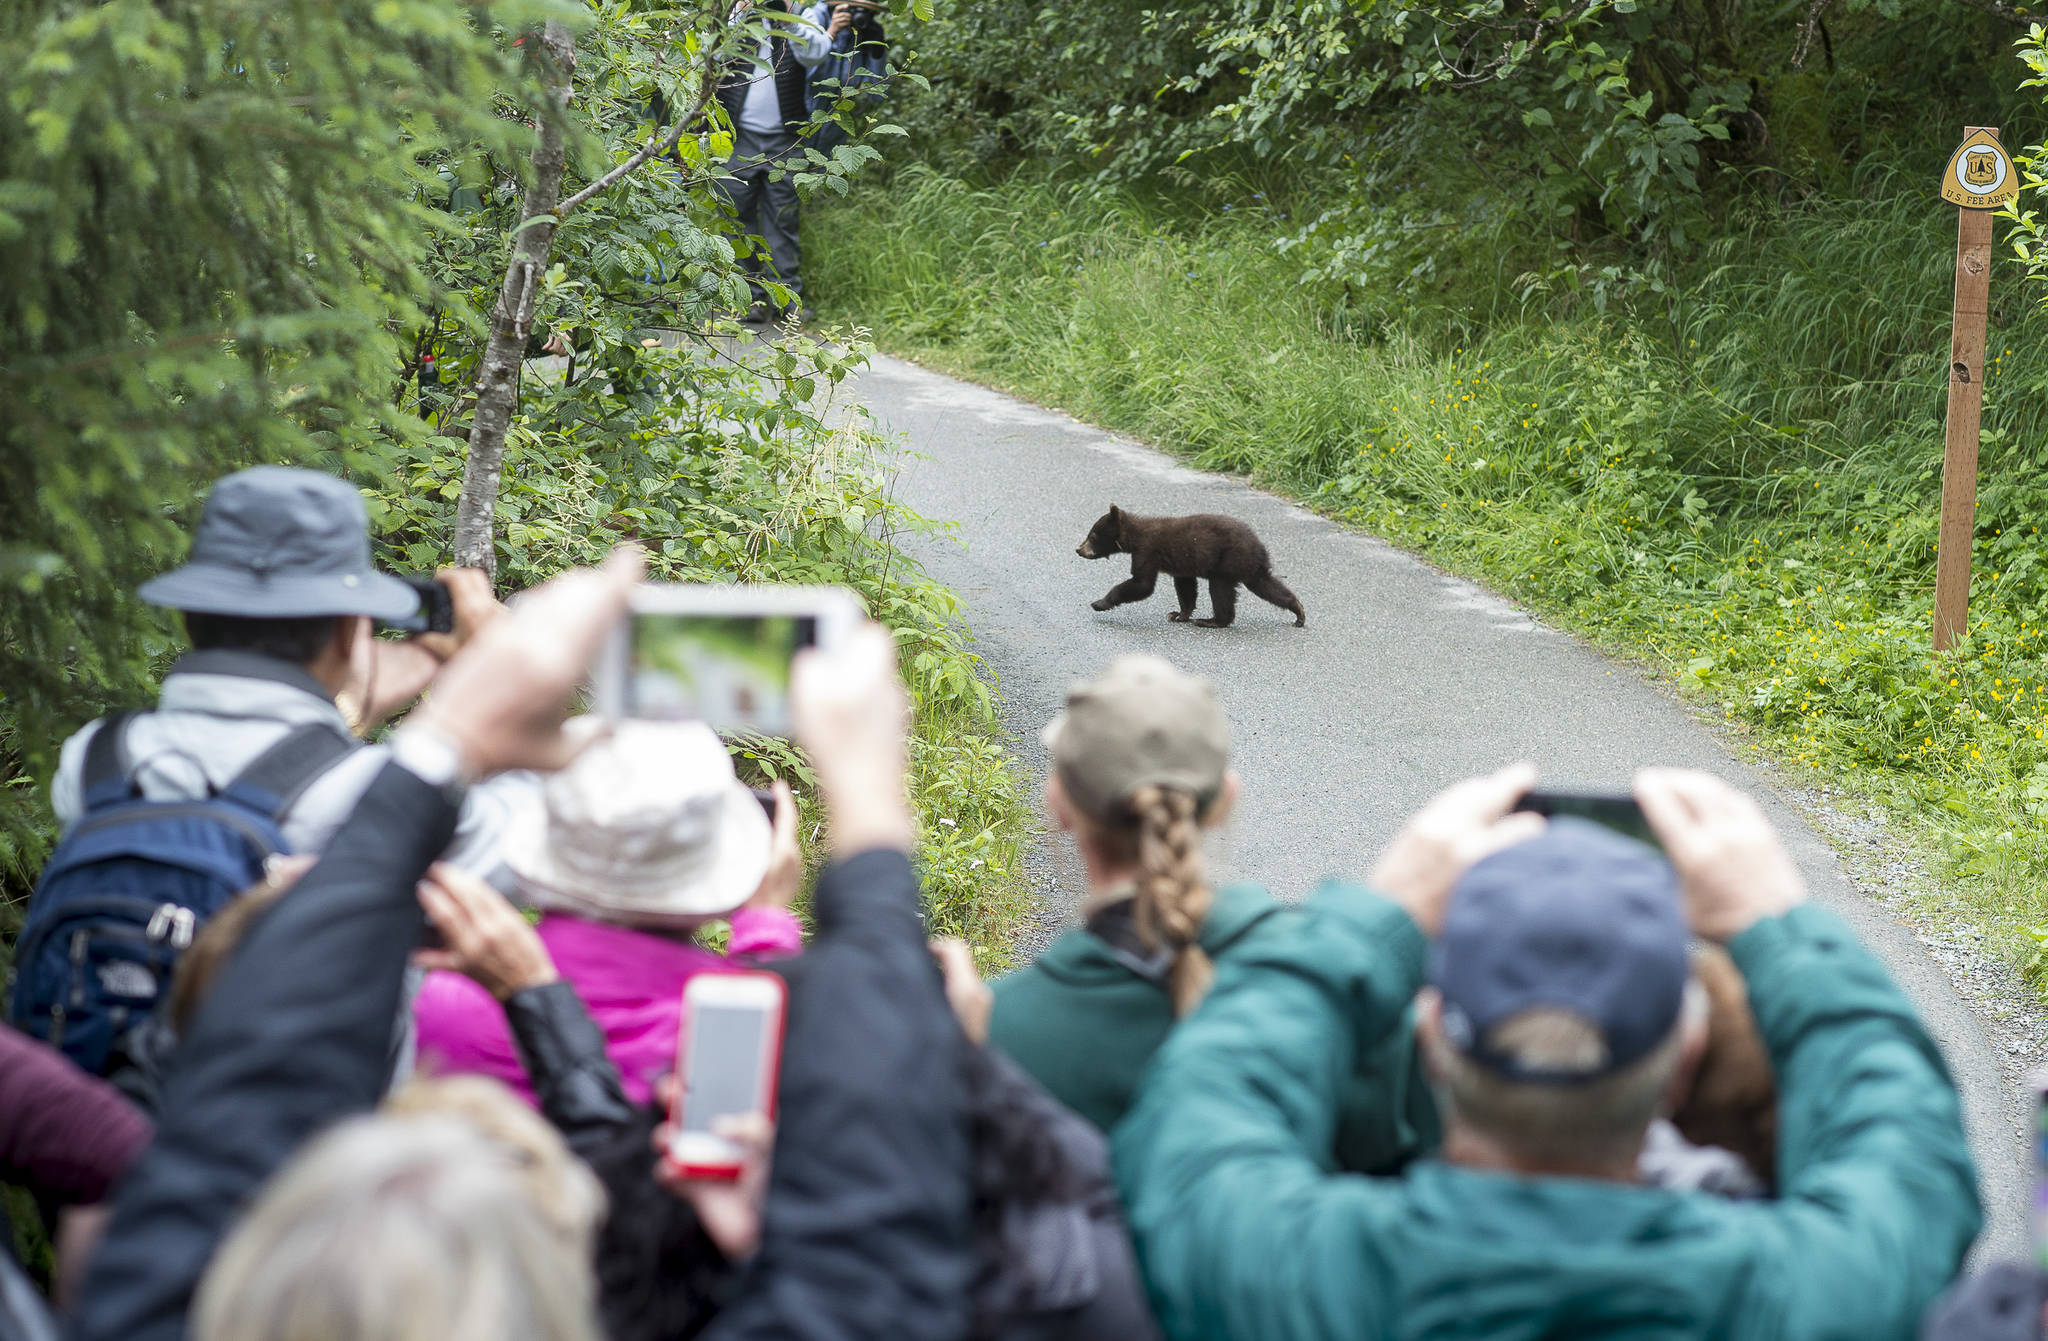 Tourists watch as one of two cubs belonging to an 18-year-old sow black bear crosses the path between groups of tourists visiting the Mendenhall Glacier Visitor Center on Wednesday, July 18, 2018. (Michael Penn | Juneau Empire)